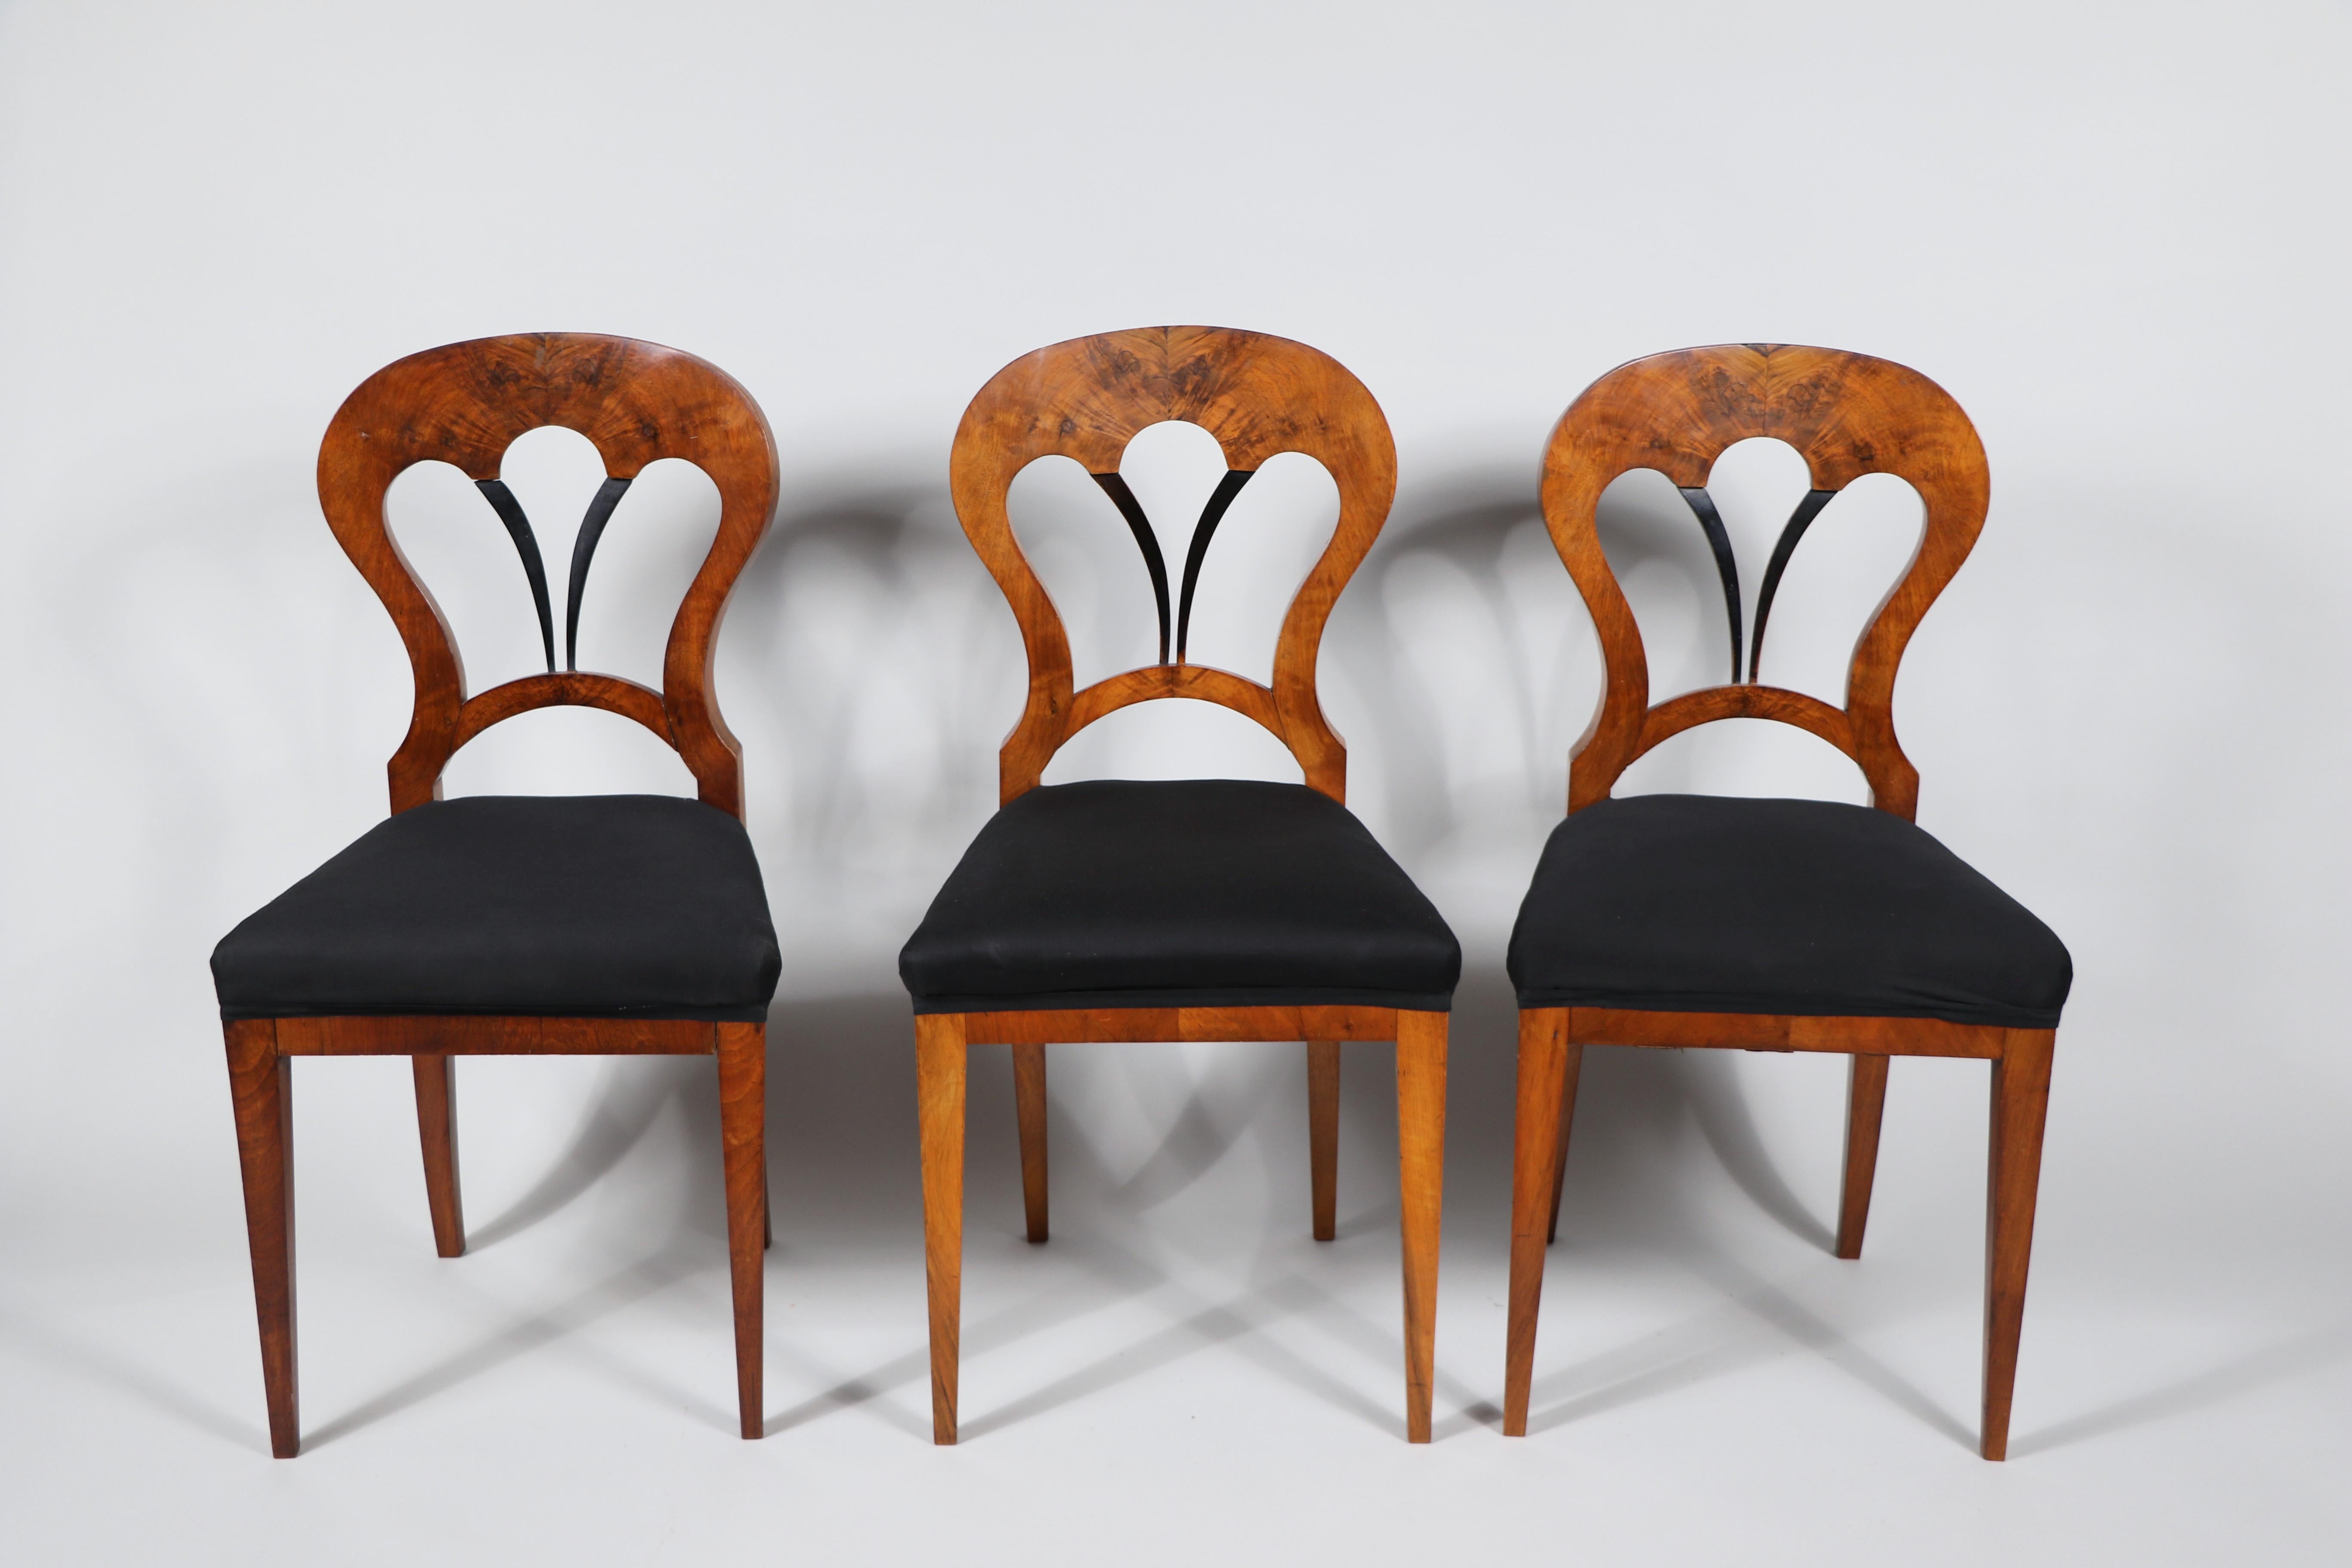 Hello,
These fine set of six Viennese Biedermeier walnut chairs from circa 1825 is the best example of an early Viennese Biedermeier which reflect innovative design and highest quality craftsmanship.

Viennese Biedermeier pieces are distinguished by